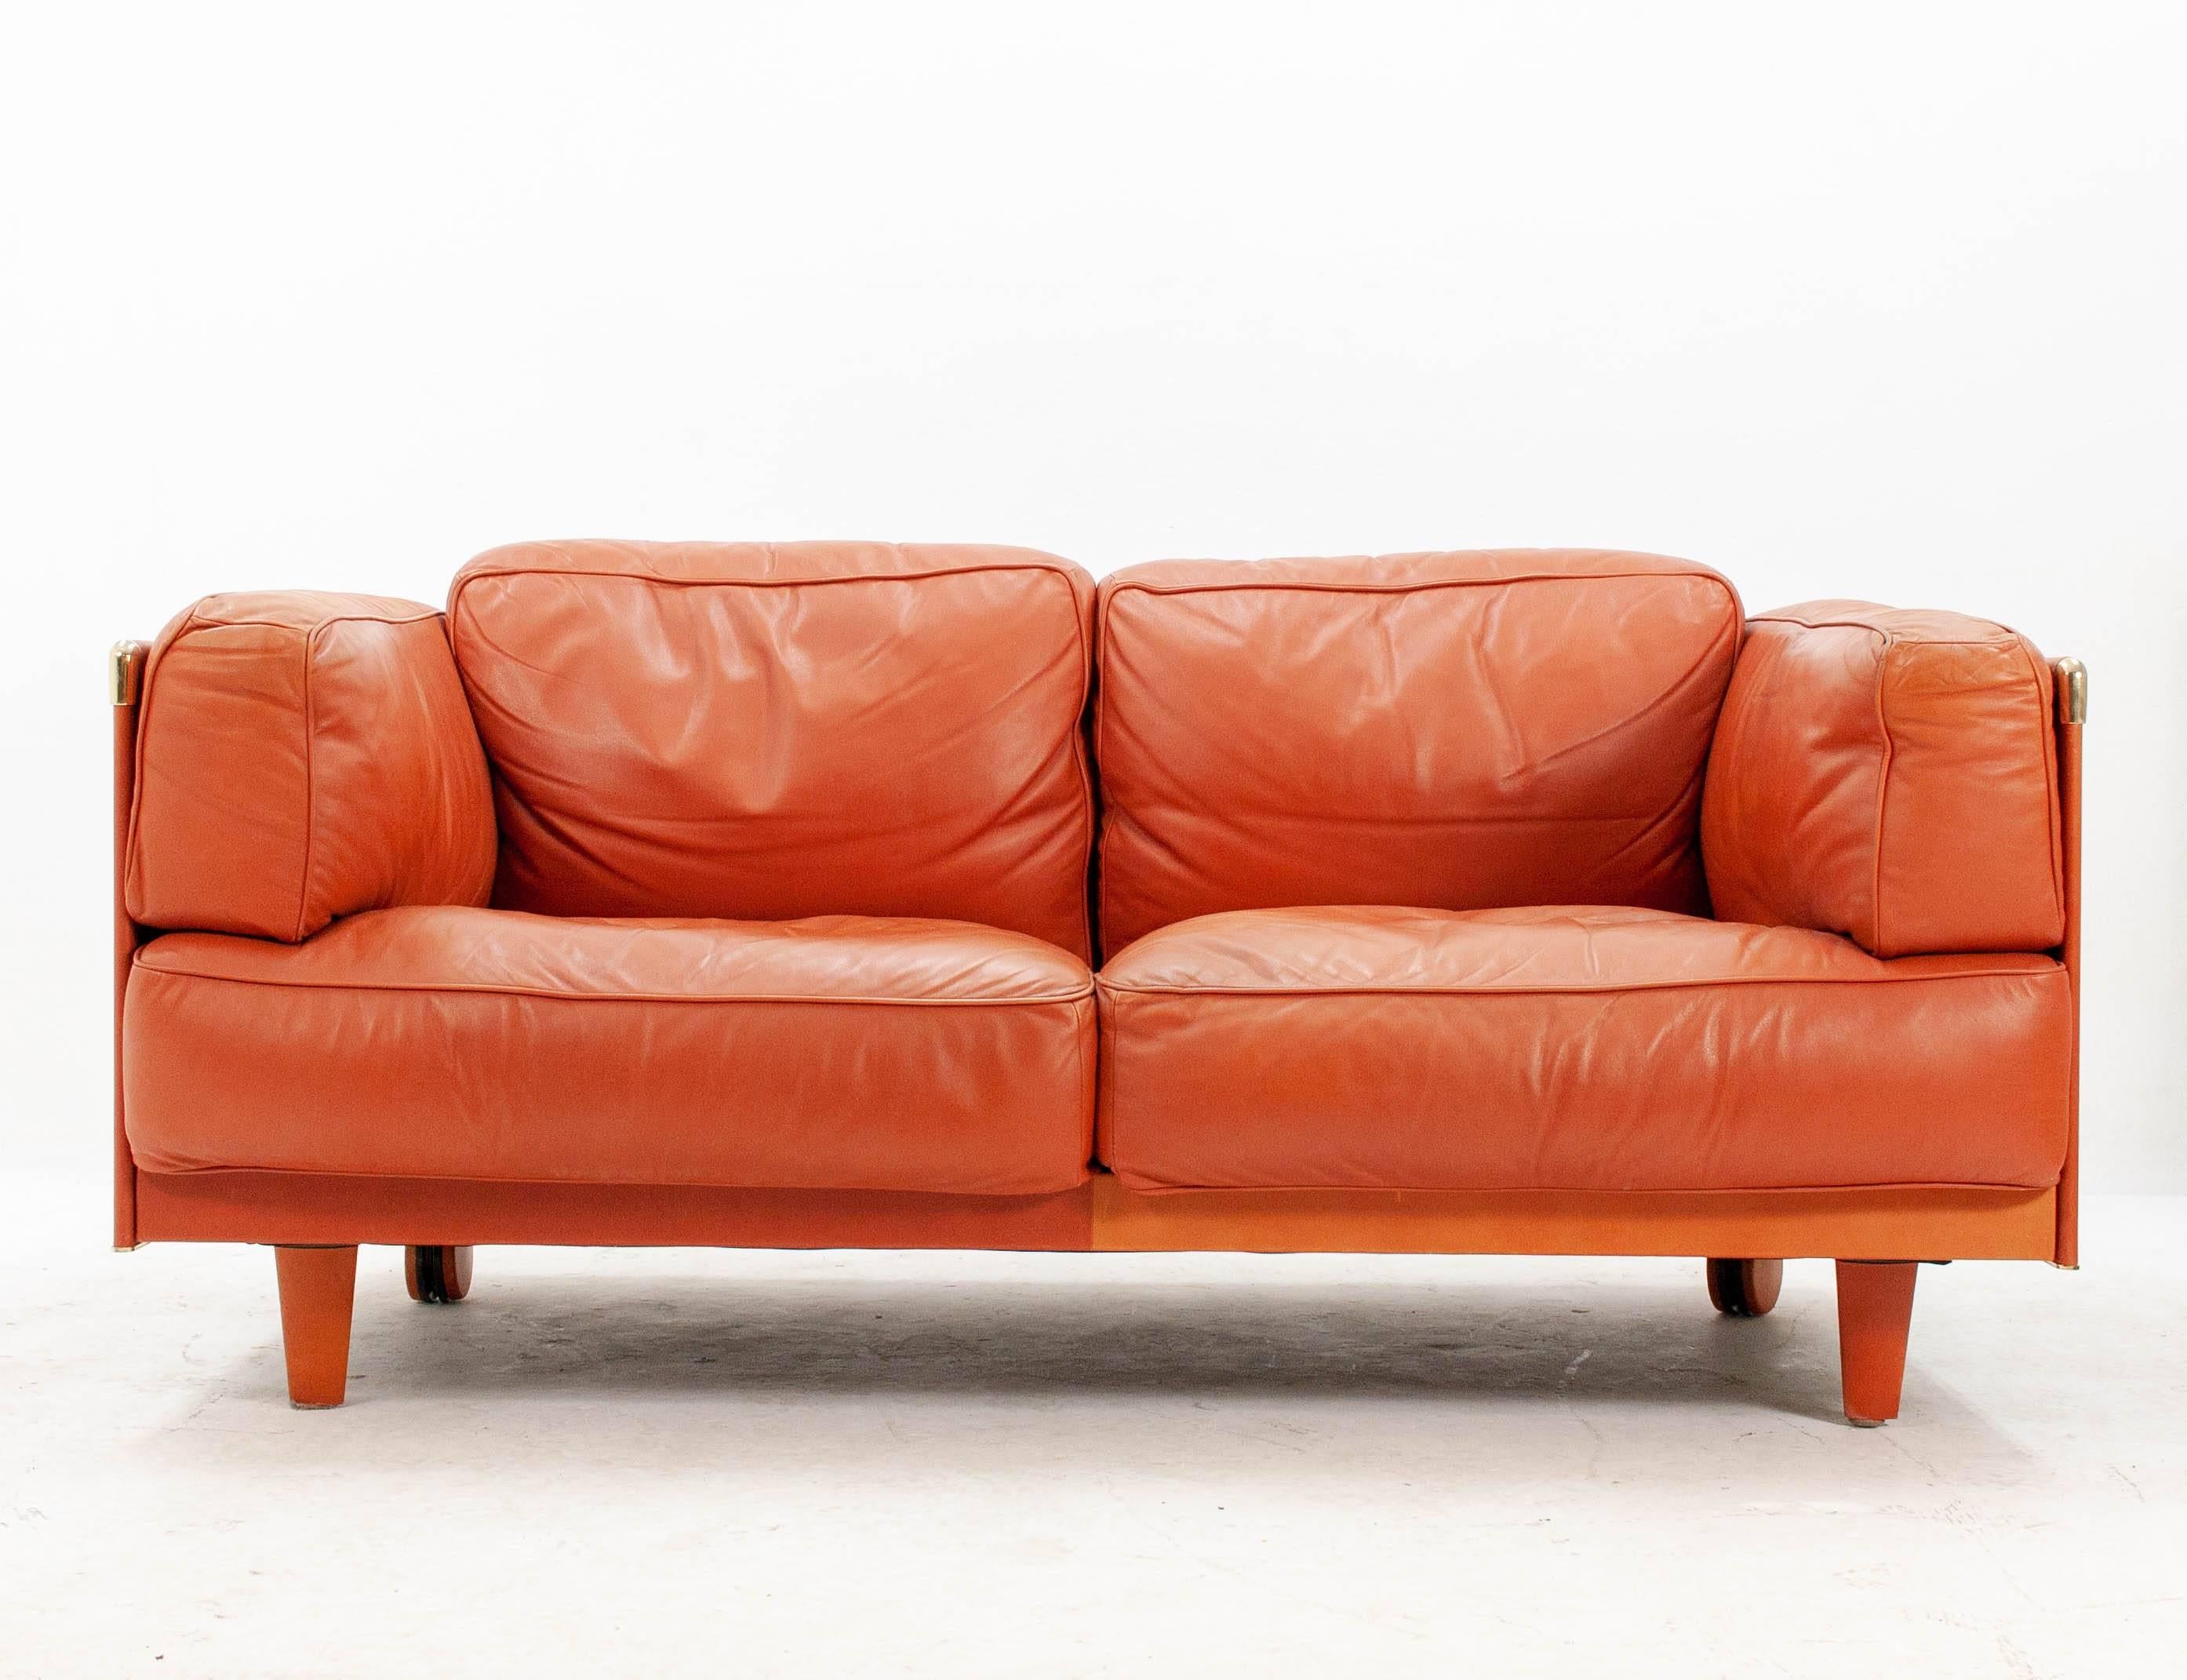 Beautiful handcrafted two-seat sofa in a rich, buttery soft orange leather. This is the two-seat version of the Poltrona Frau 'Twice' model designed by Pierluigi Cerra and built in the late 1990s.